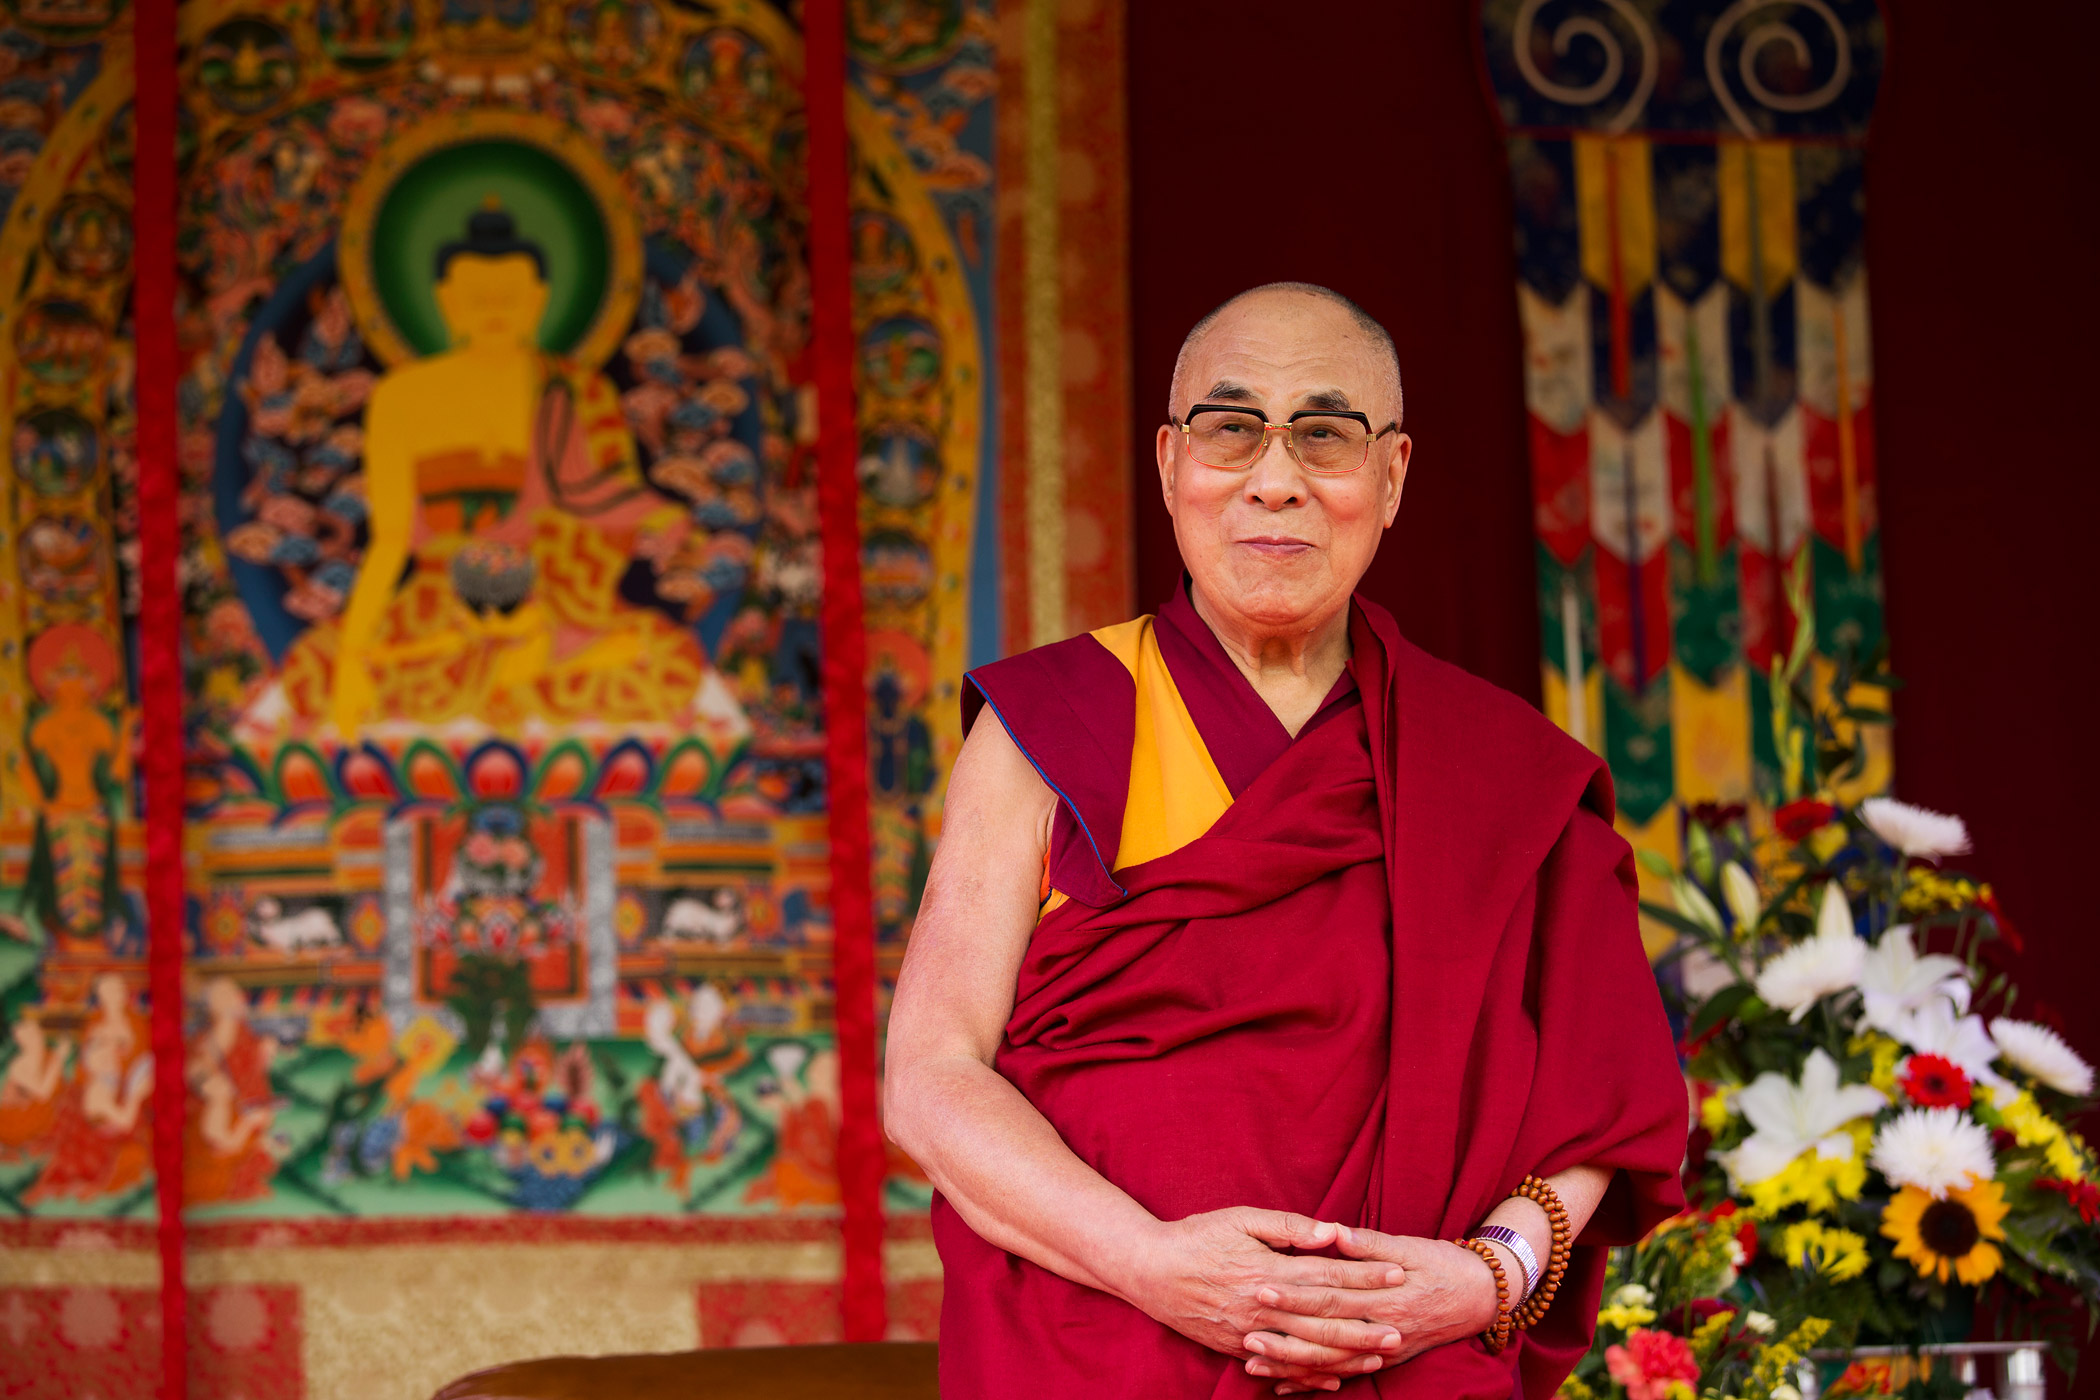 The Dalai Lama stands on stage before making a speech to an audience at the ESS Stadium in Aldershot, England, on June 29, 2015 (Matt Dunham—AP)